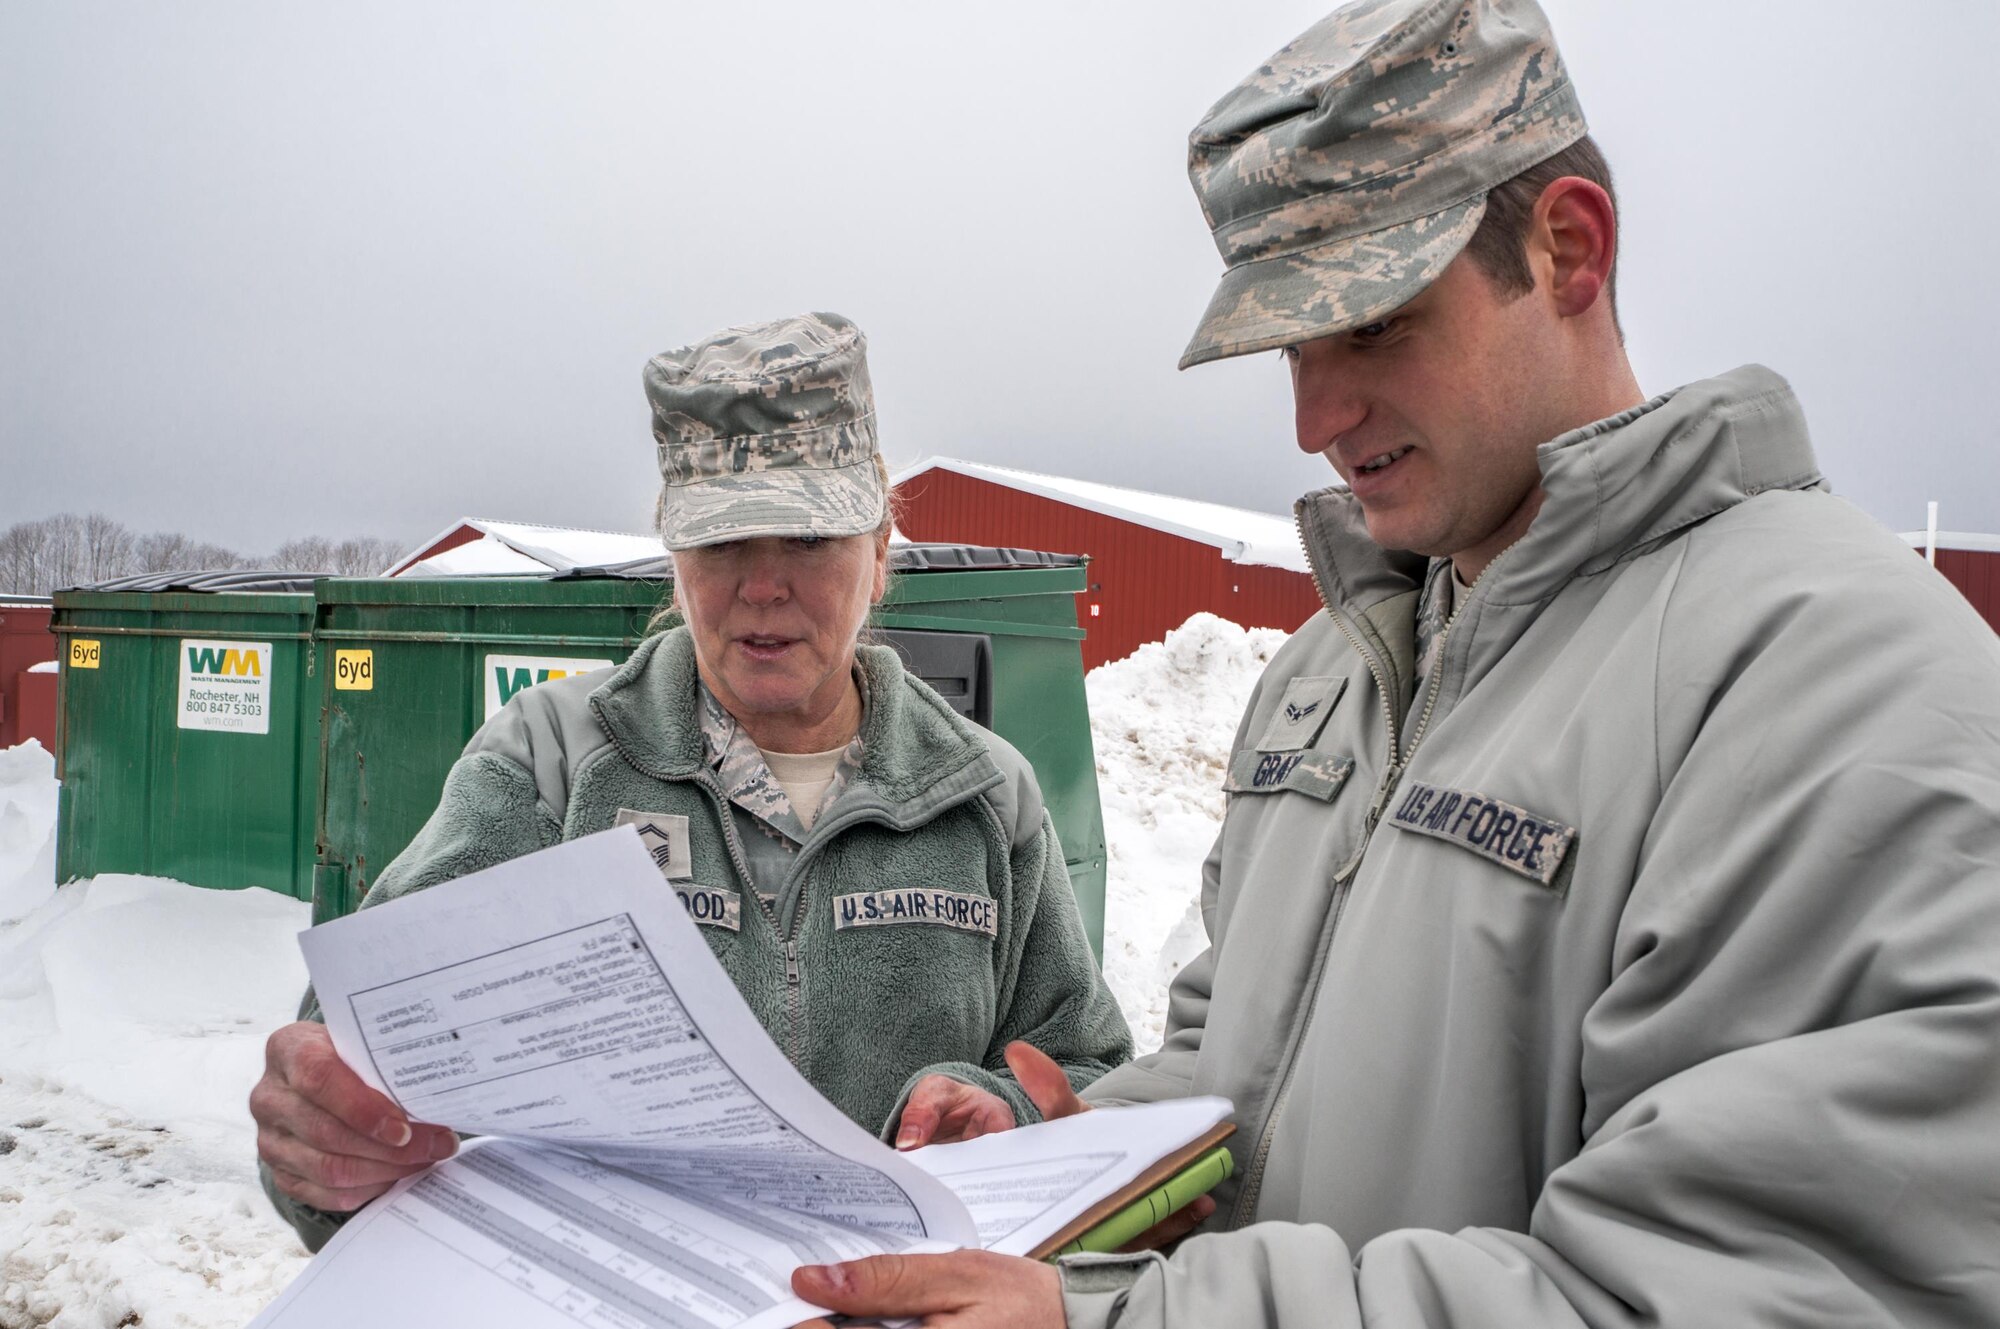 Senior Master Sgt. Regina Rockwood, 157th Mission Support Group superintendent, left, and Airman 1st Class Philip Gray, 22nd Contracting Squadron contract administrator, review site visit details, Feb. 16, 2017, at Pease Air Force Base, New Hampshire.  Contract Airmen solicit and award contracts, work with local contractors for construction projects and ensure the government is getting the best value possible. (Courtesy photo)